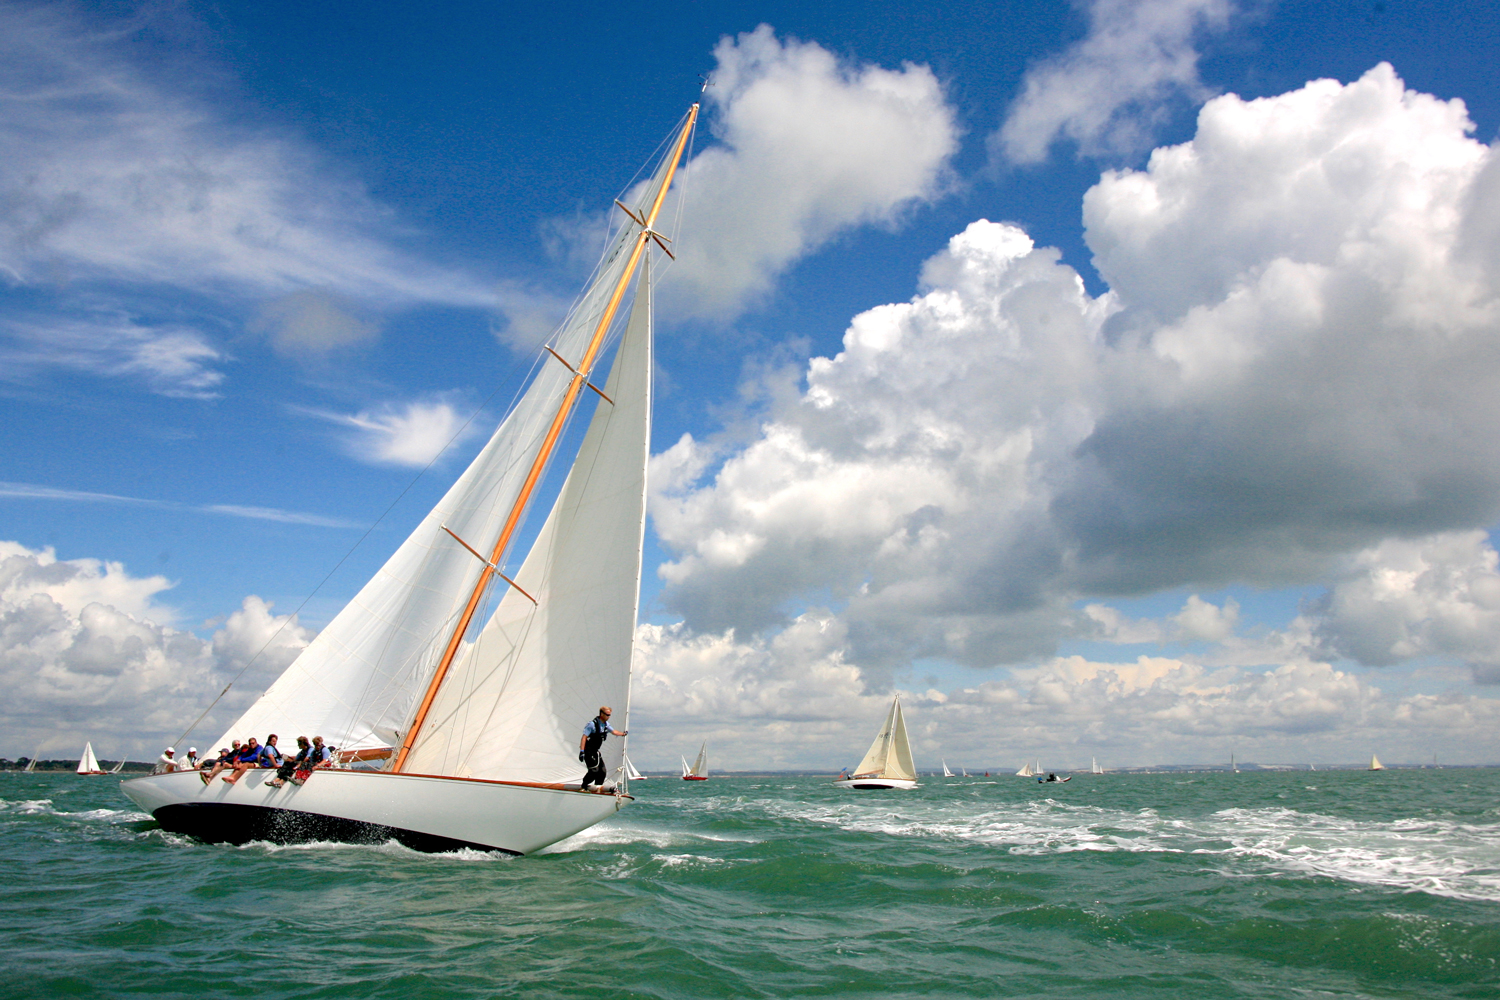 Sailing on The Solent